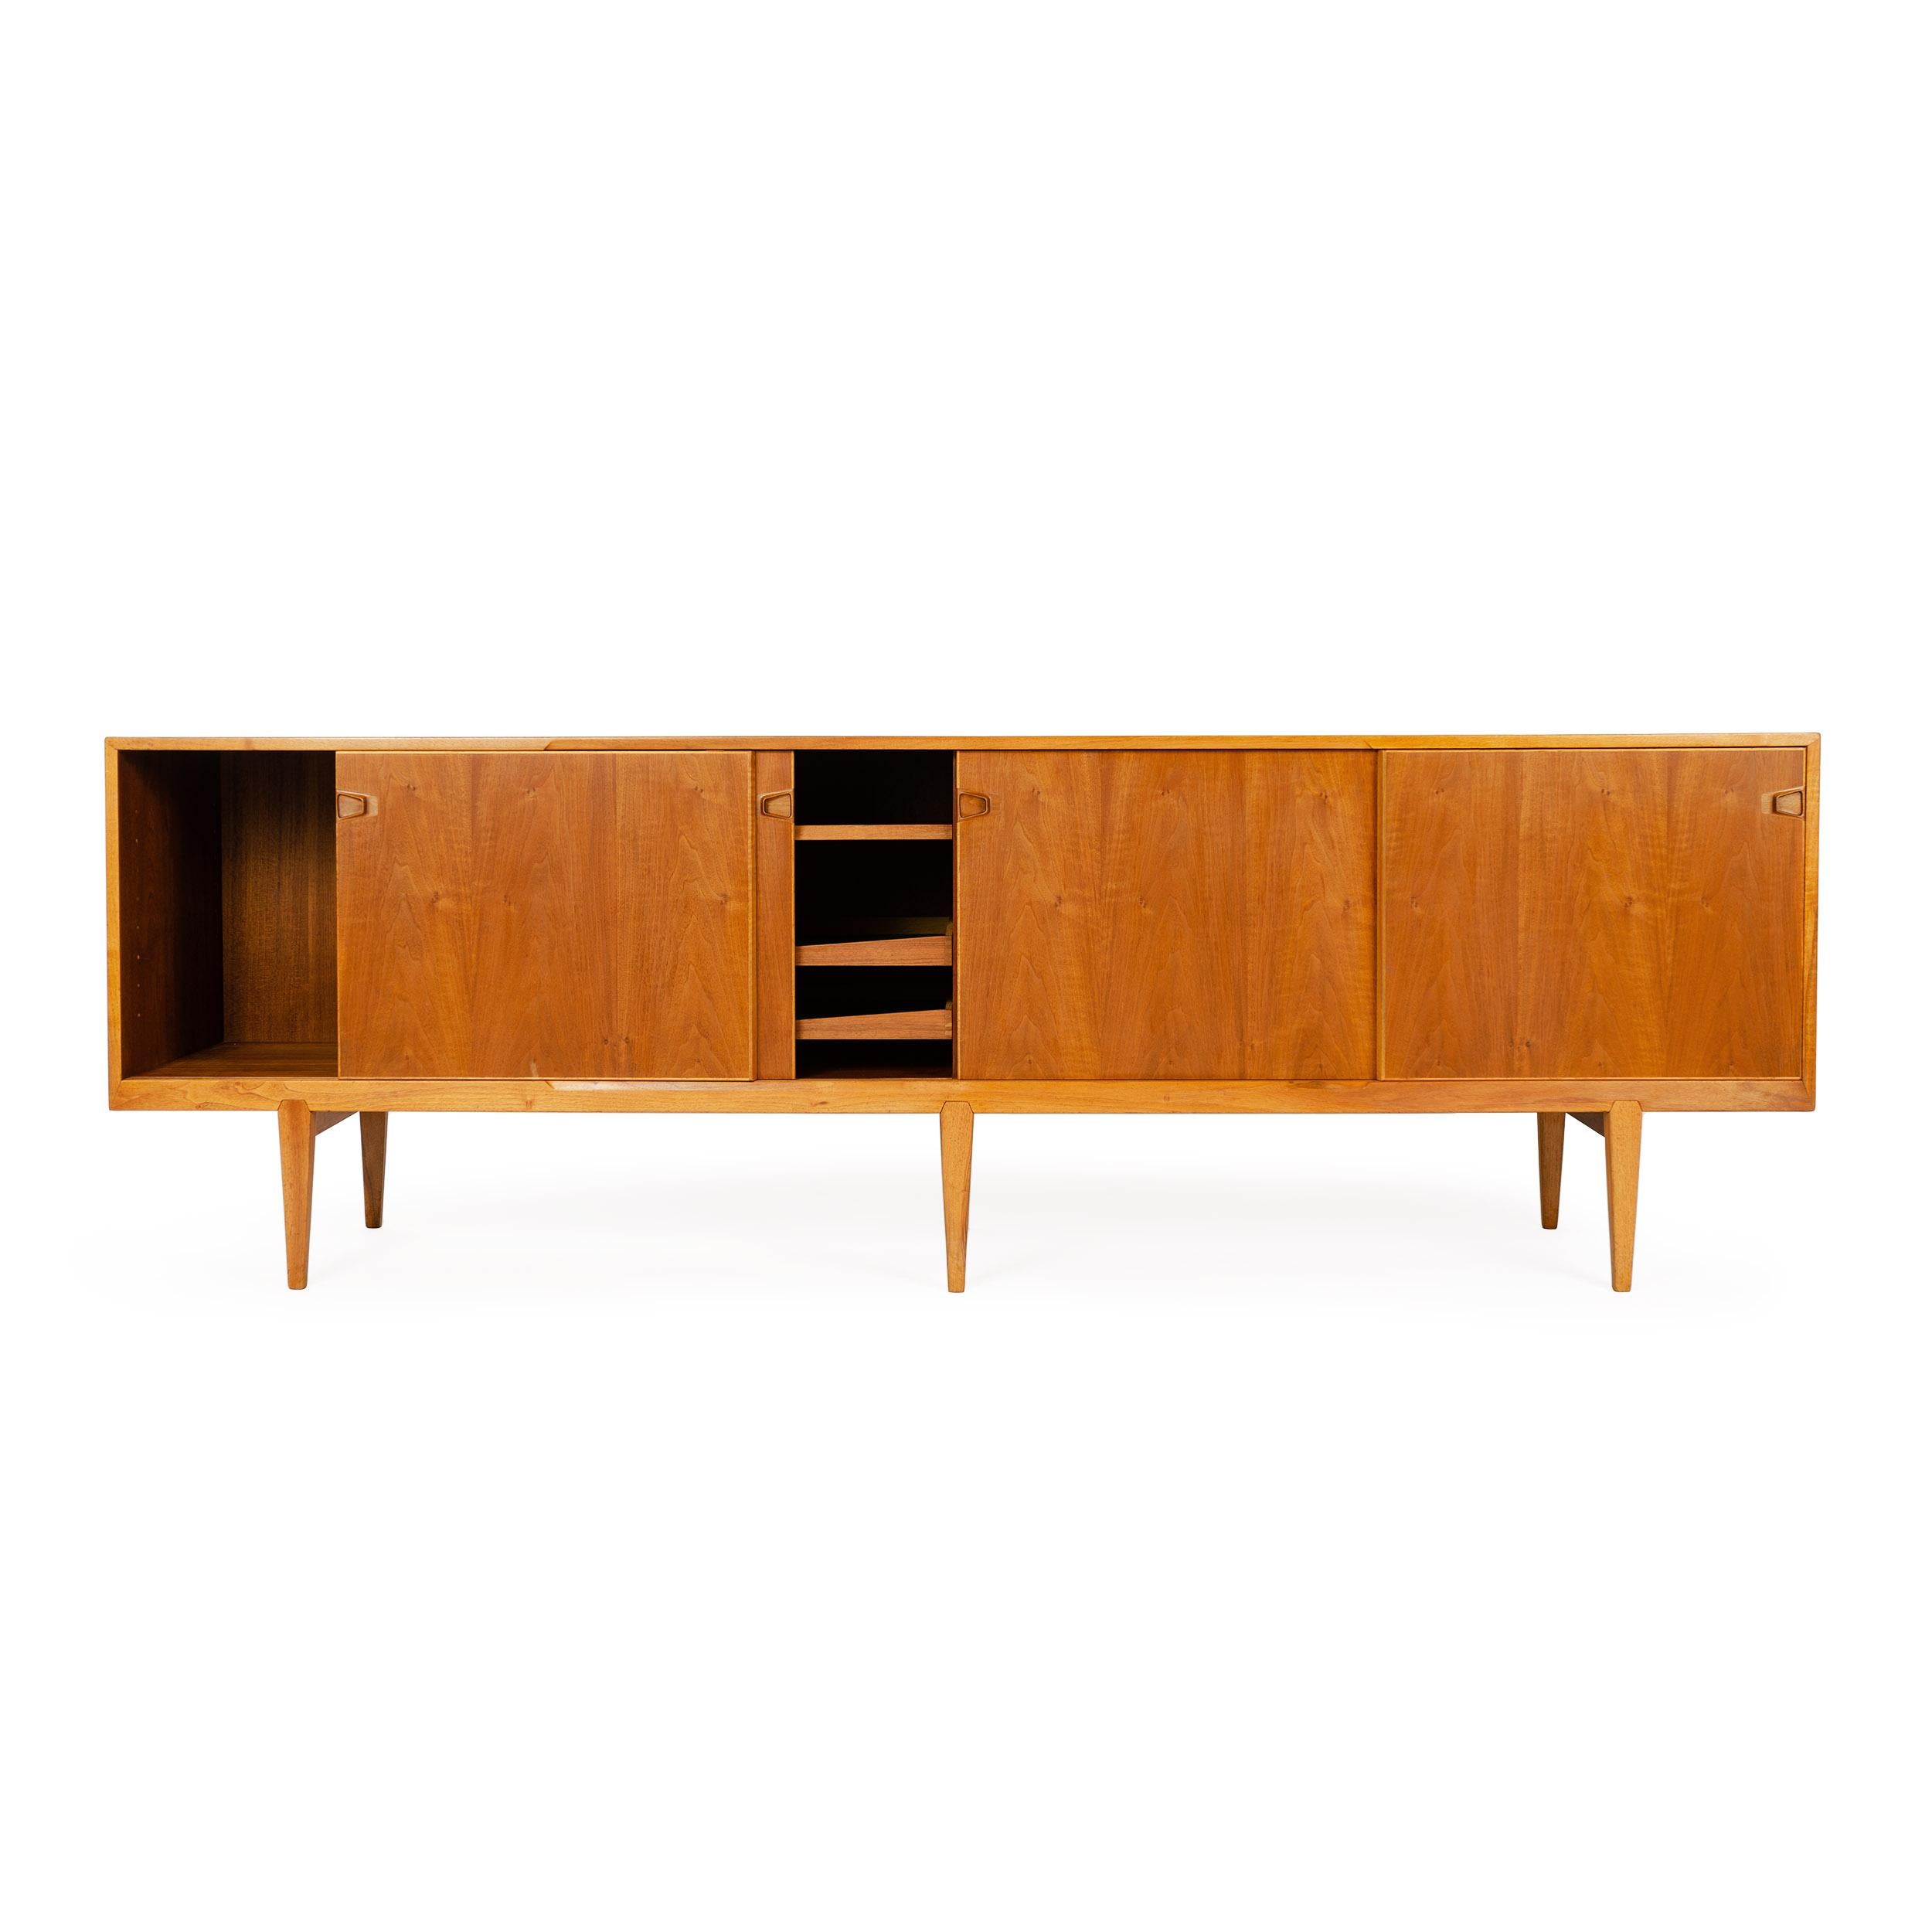 A walnut wood credenza designed by H. Rosengren Hansen featuring four sliding doors concealing shelving and drawers over six tapered legs. Made by Brande Møbelindustri in Denmark circa 1950s